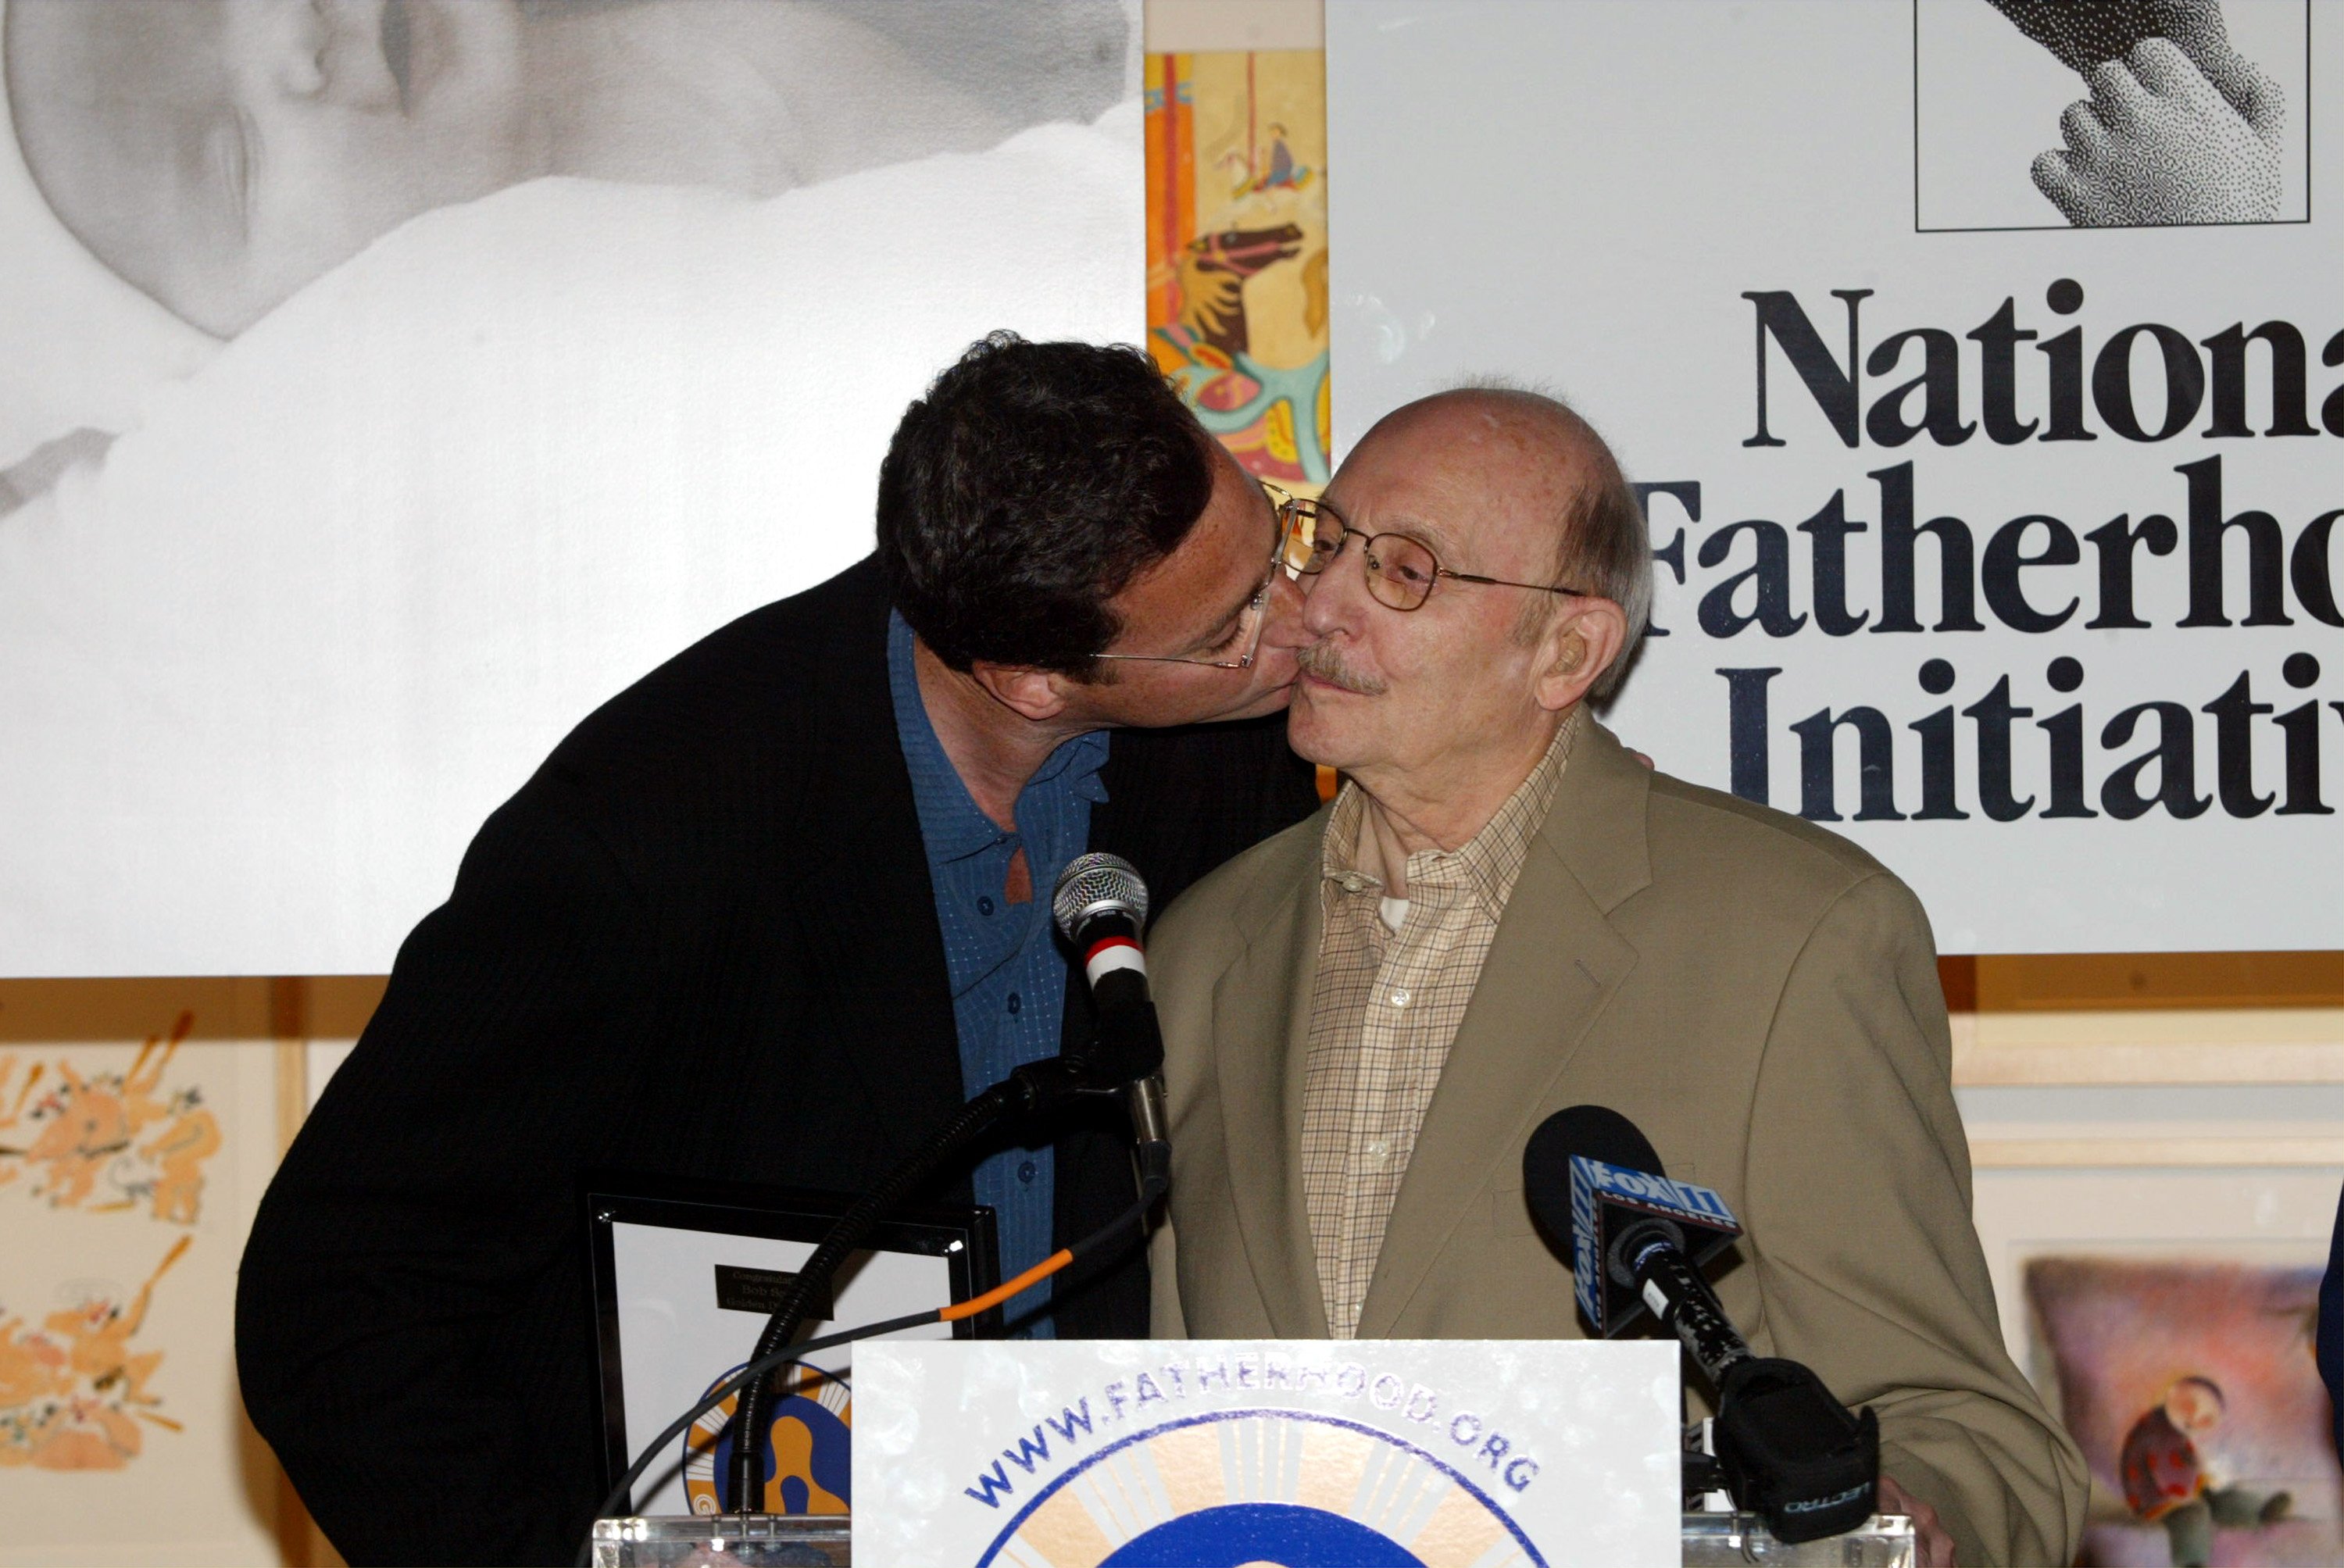 Bob Saget kisses his dad Benjamin Saget during a press conference for the National Fatherhood Initiative "Golden Dads" campaign on June 4, 2003, in Los Angeles, California. | Source: Getty Images